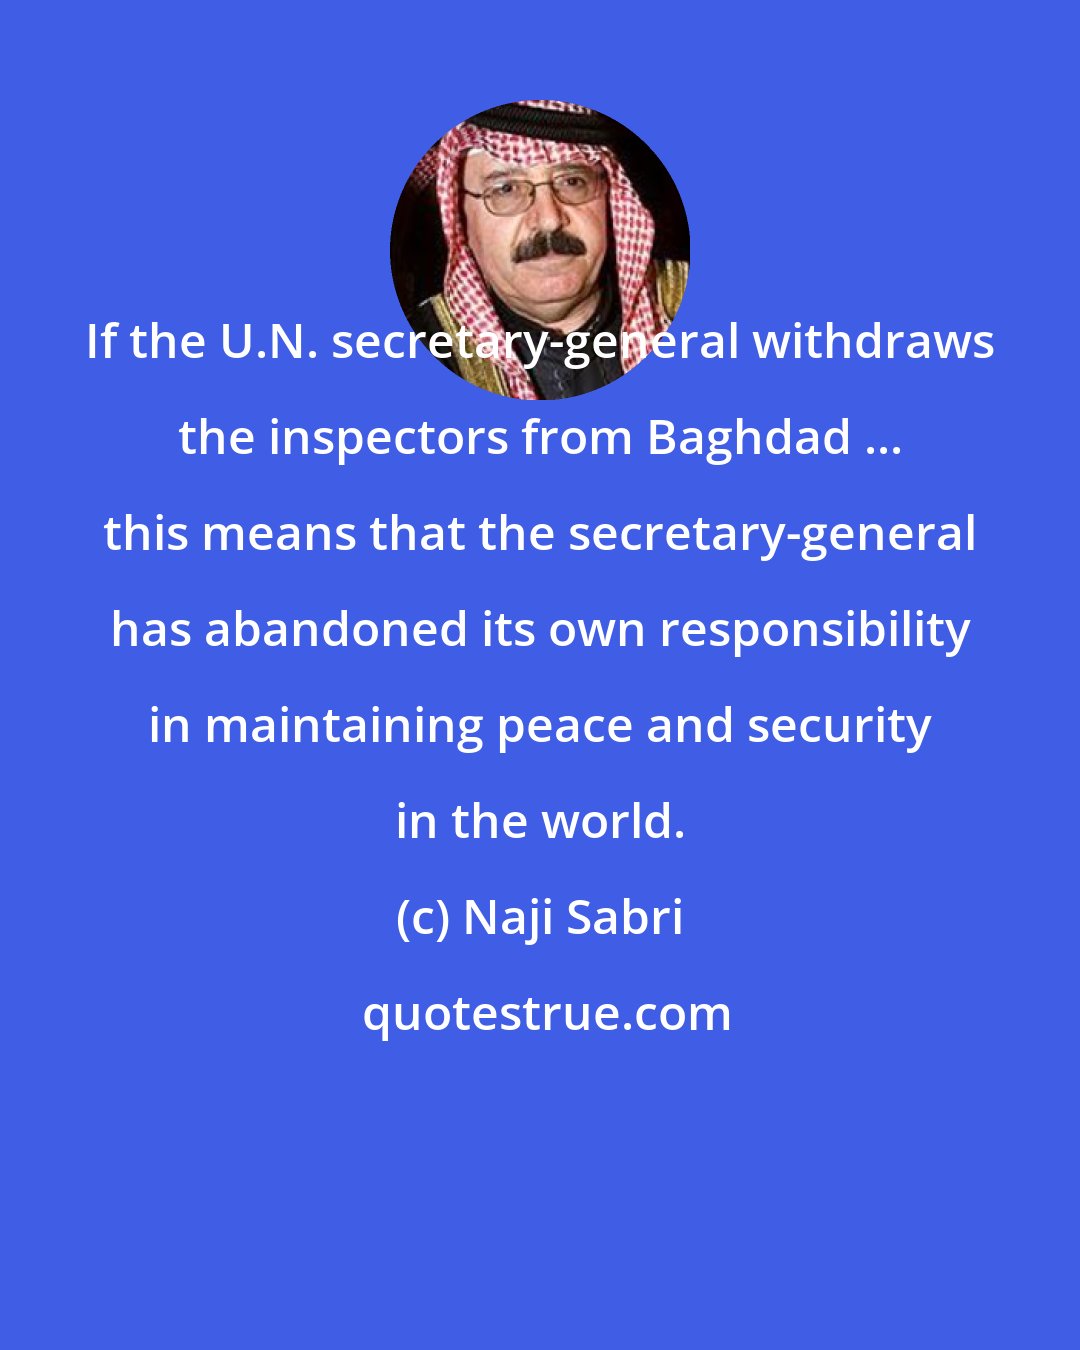 Naji Sabri: If the U.N. secretary-general withdraws the inspectors from Baghdad ... this means that the secretary-general has abandoned its own responsibility in maintaining peace and security in the world.